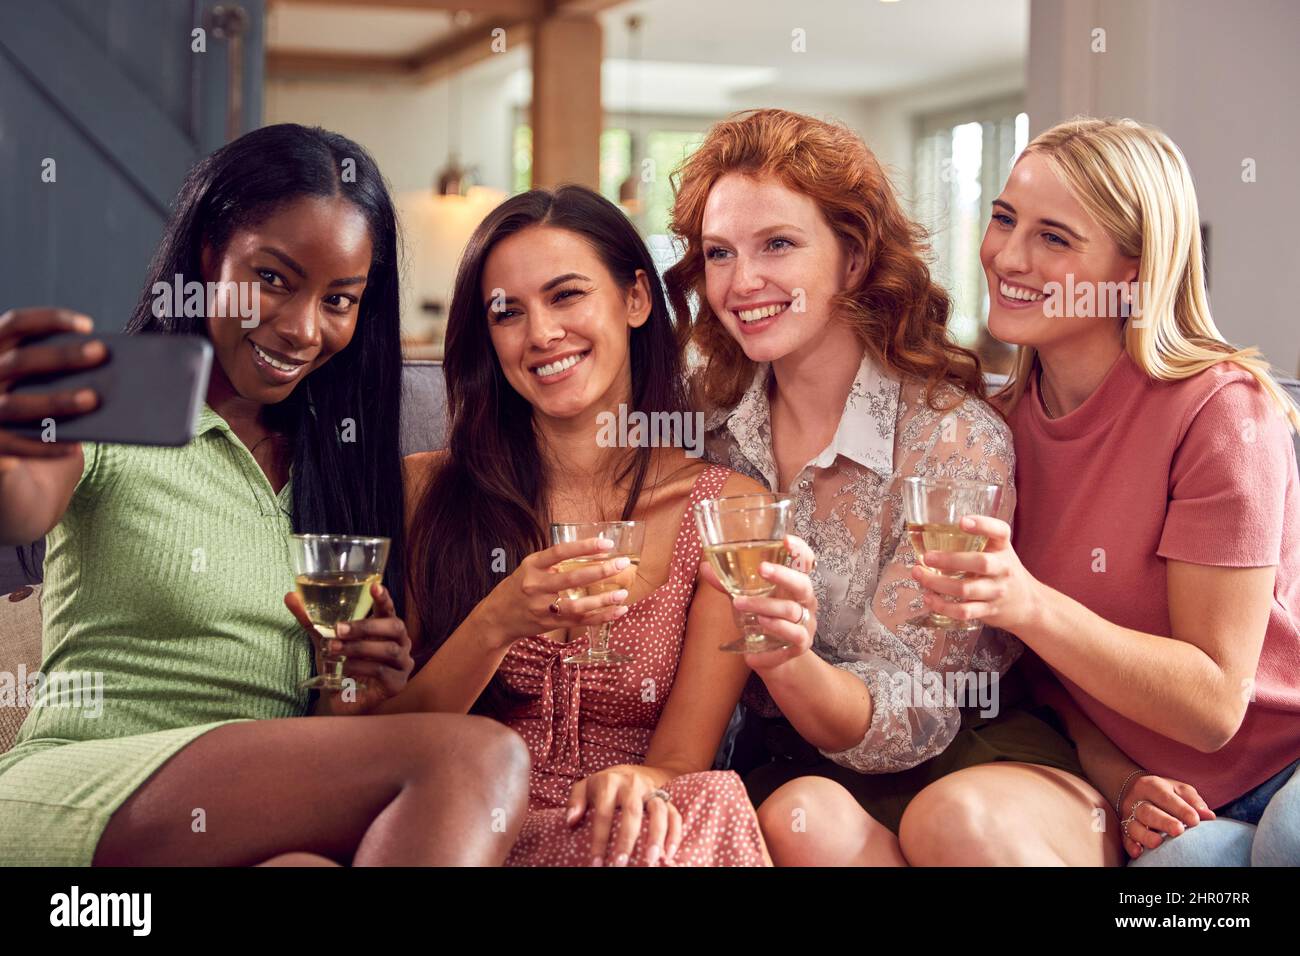 Multi-Cultural Group Of Female Friends Sitting On Sofa At Home Posing For Selfie Together Stock Photo